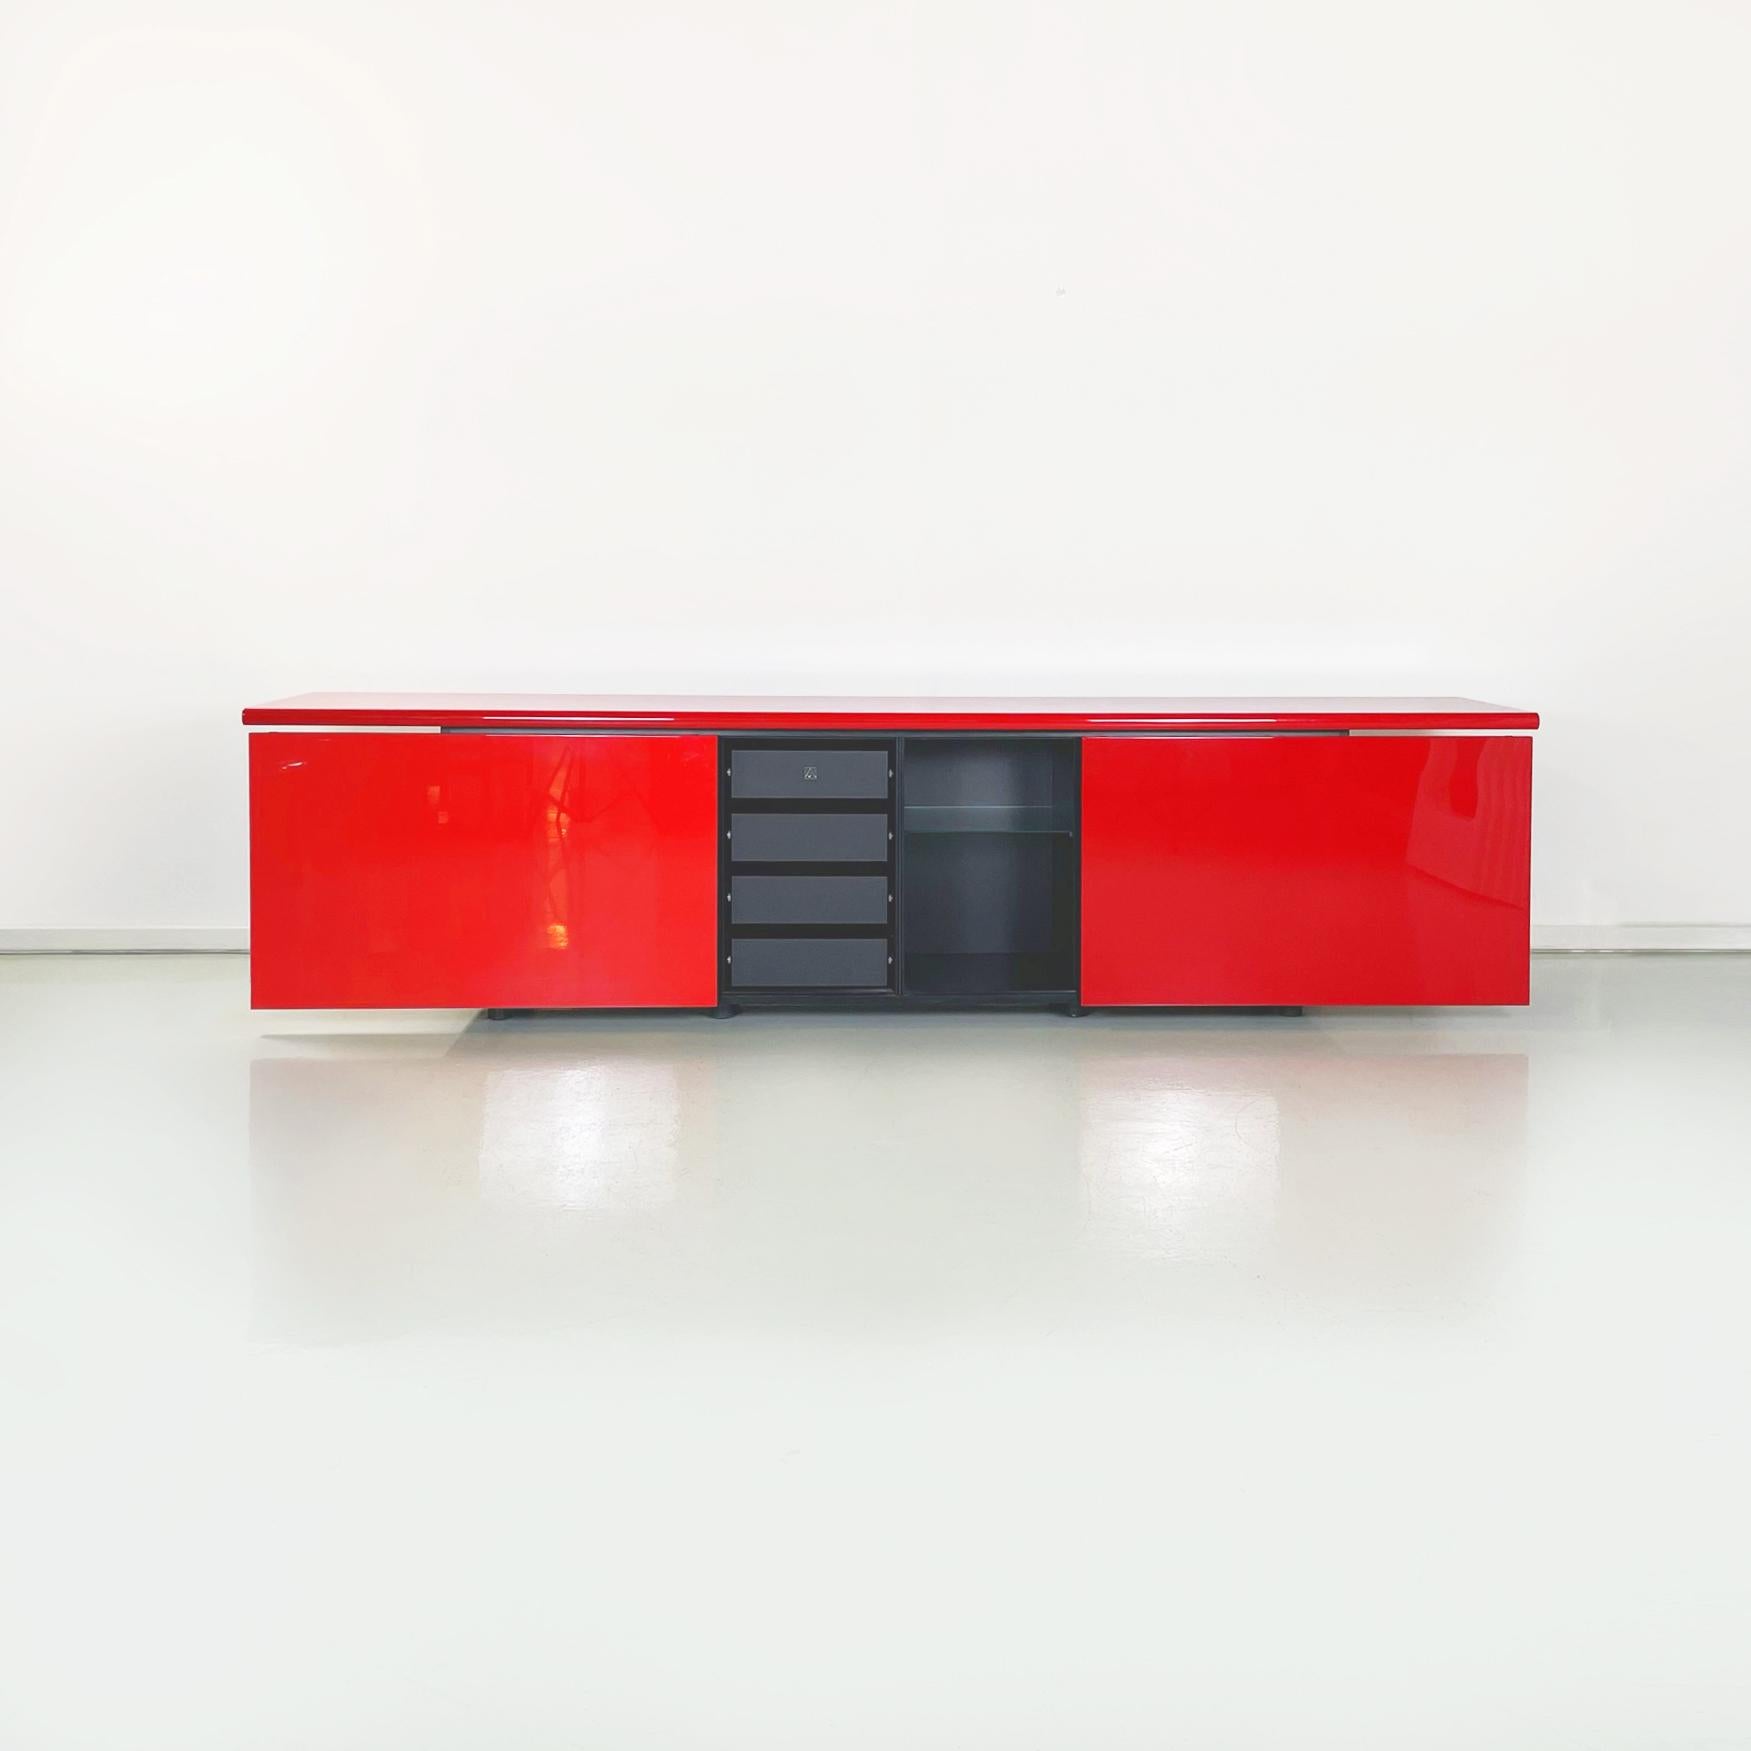 Late 20th Century Italian Modern Red Sideboard Sheraton by Stoppino and Acerbis for Acerbis, 1977 For Sale